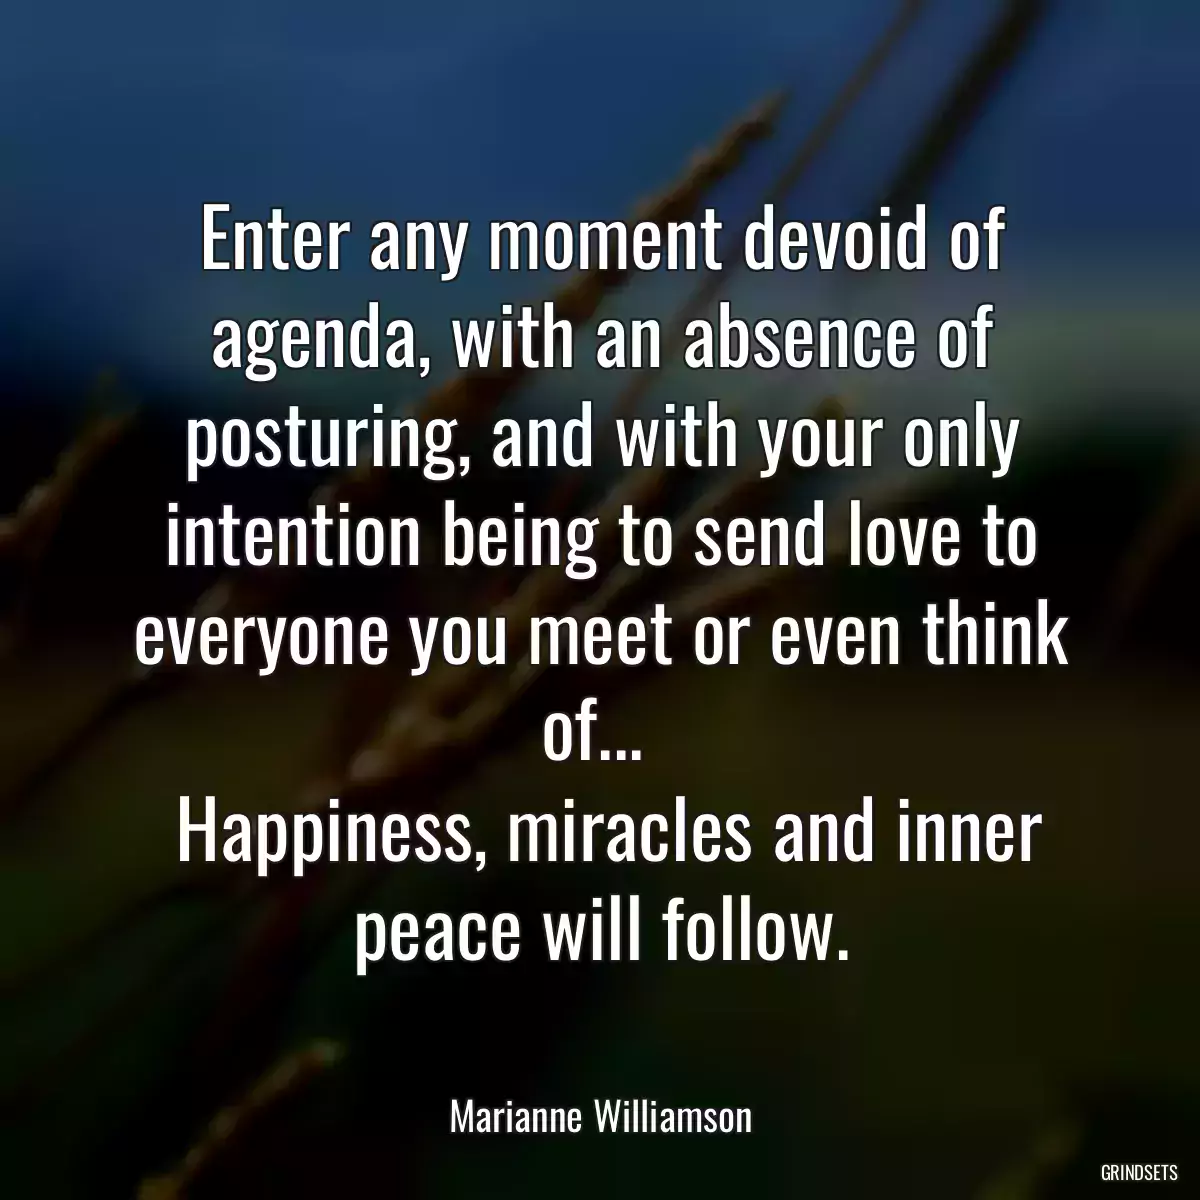 Enter any moment devoid of agenda, with an absence of posturing, and with your only intention being to send love to everyone you meet or even think of... 
 Happiness, miracles and inner peace will follow.